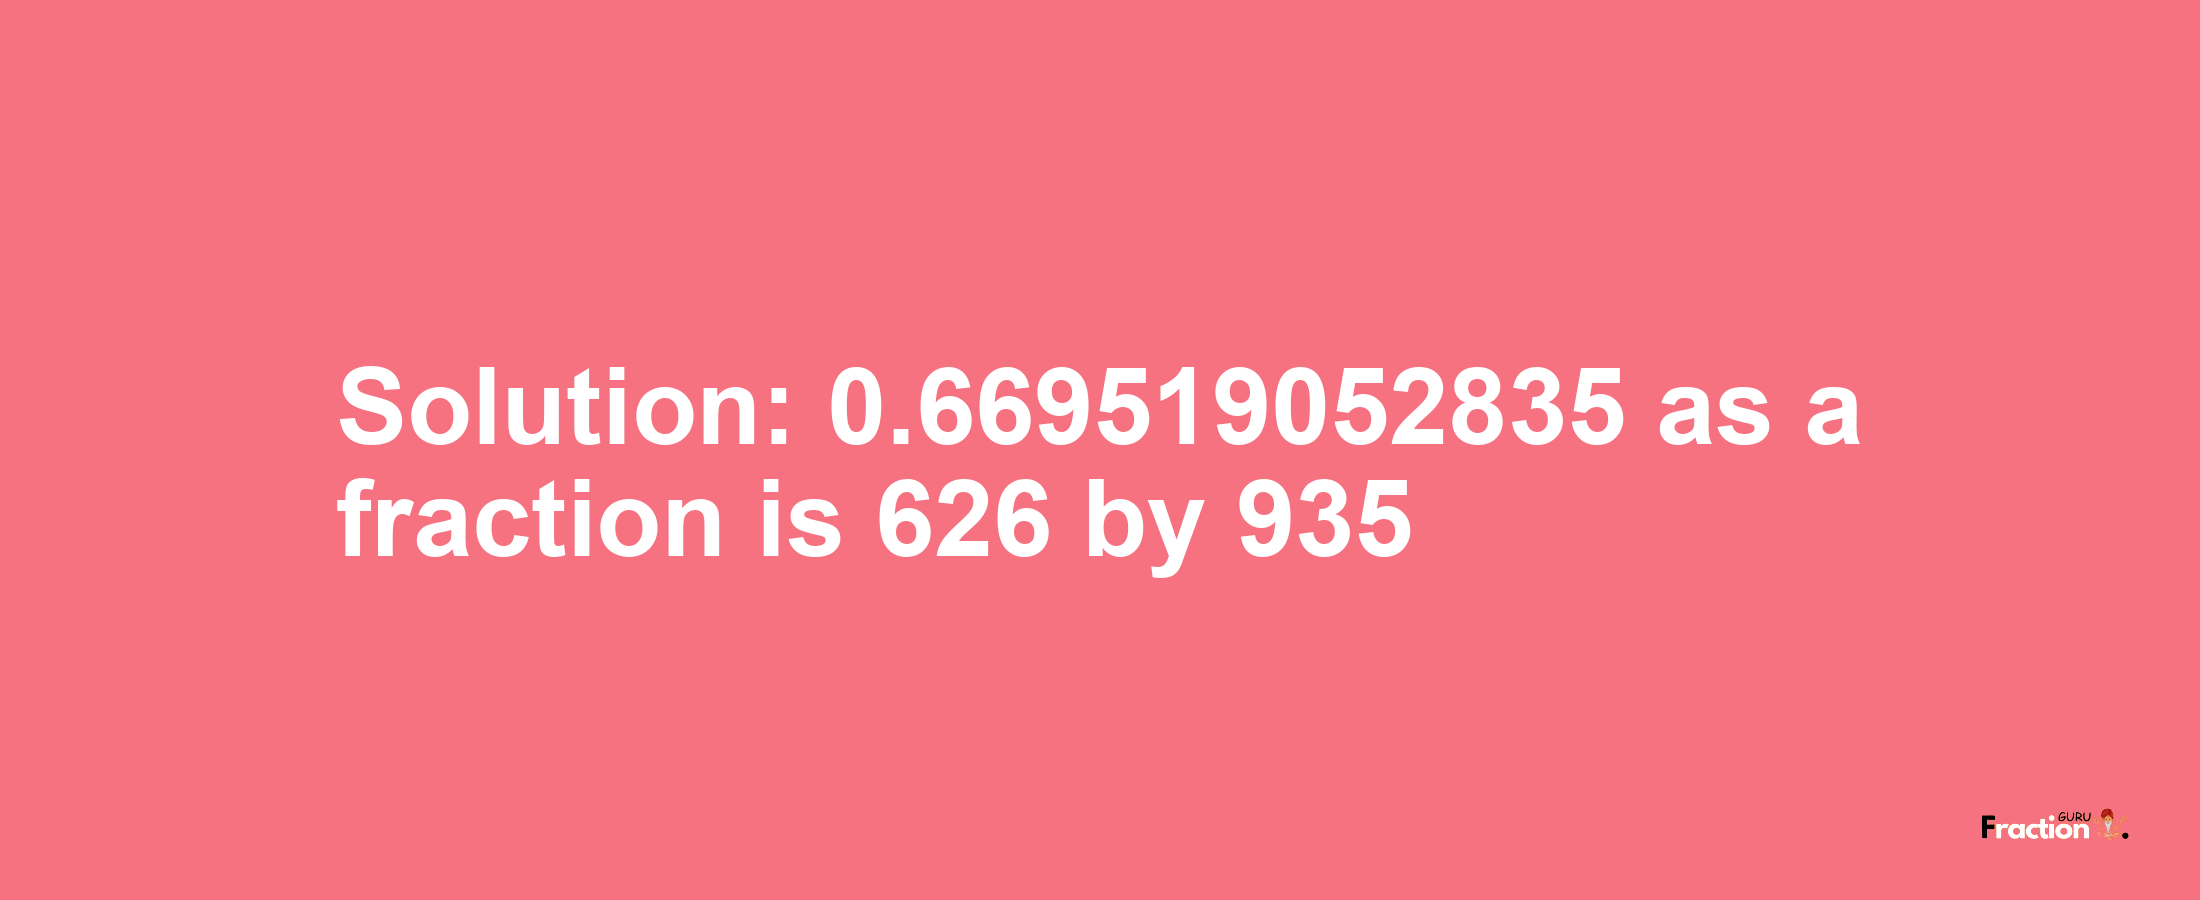 Solution:0.669519052835 as a fraction is 626/935